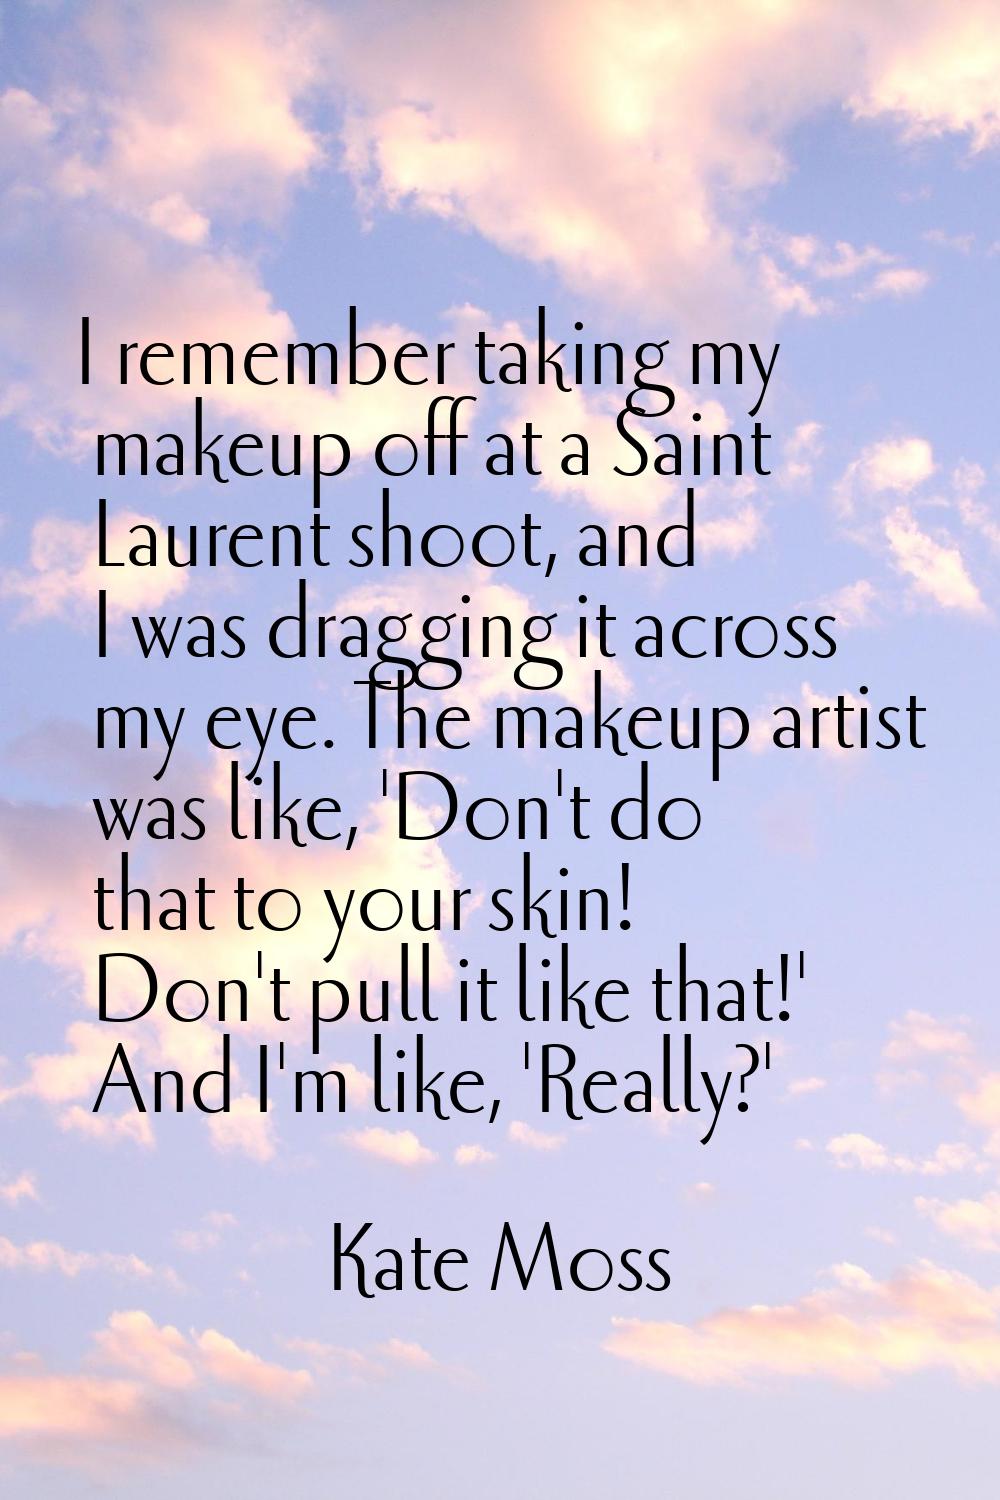 I remember taking my makeup off at a Saint Laurent shoot, and I was dragging it across my eye. The 